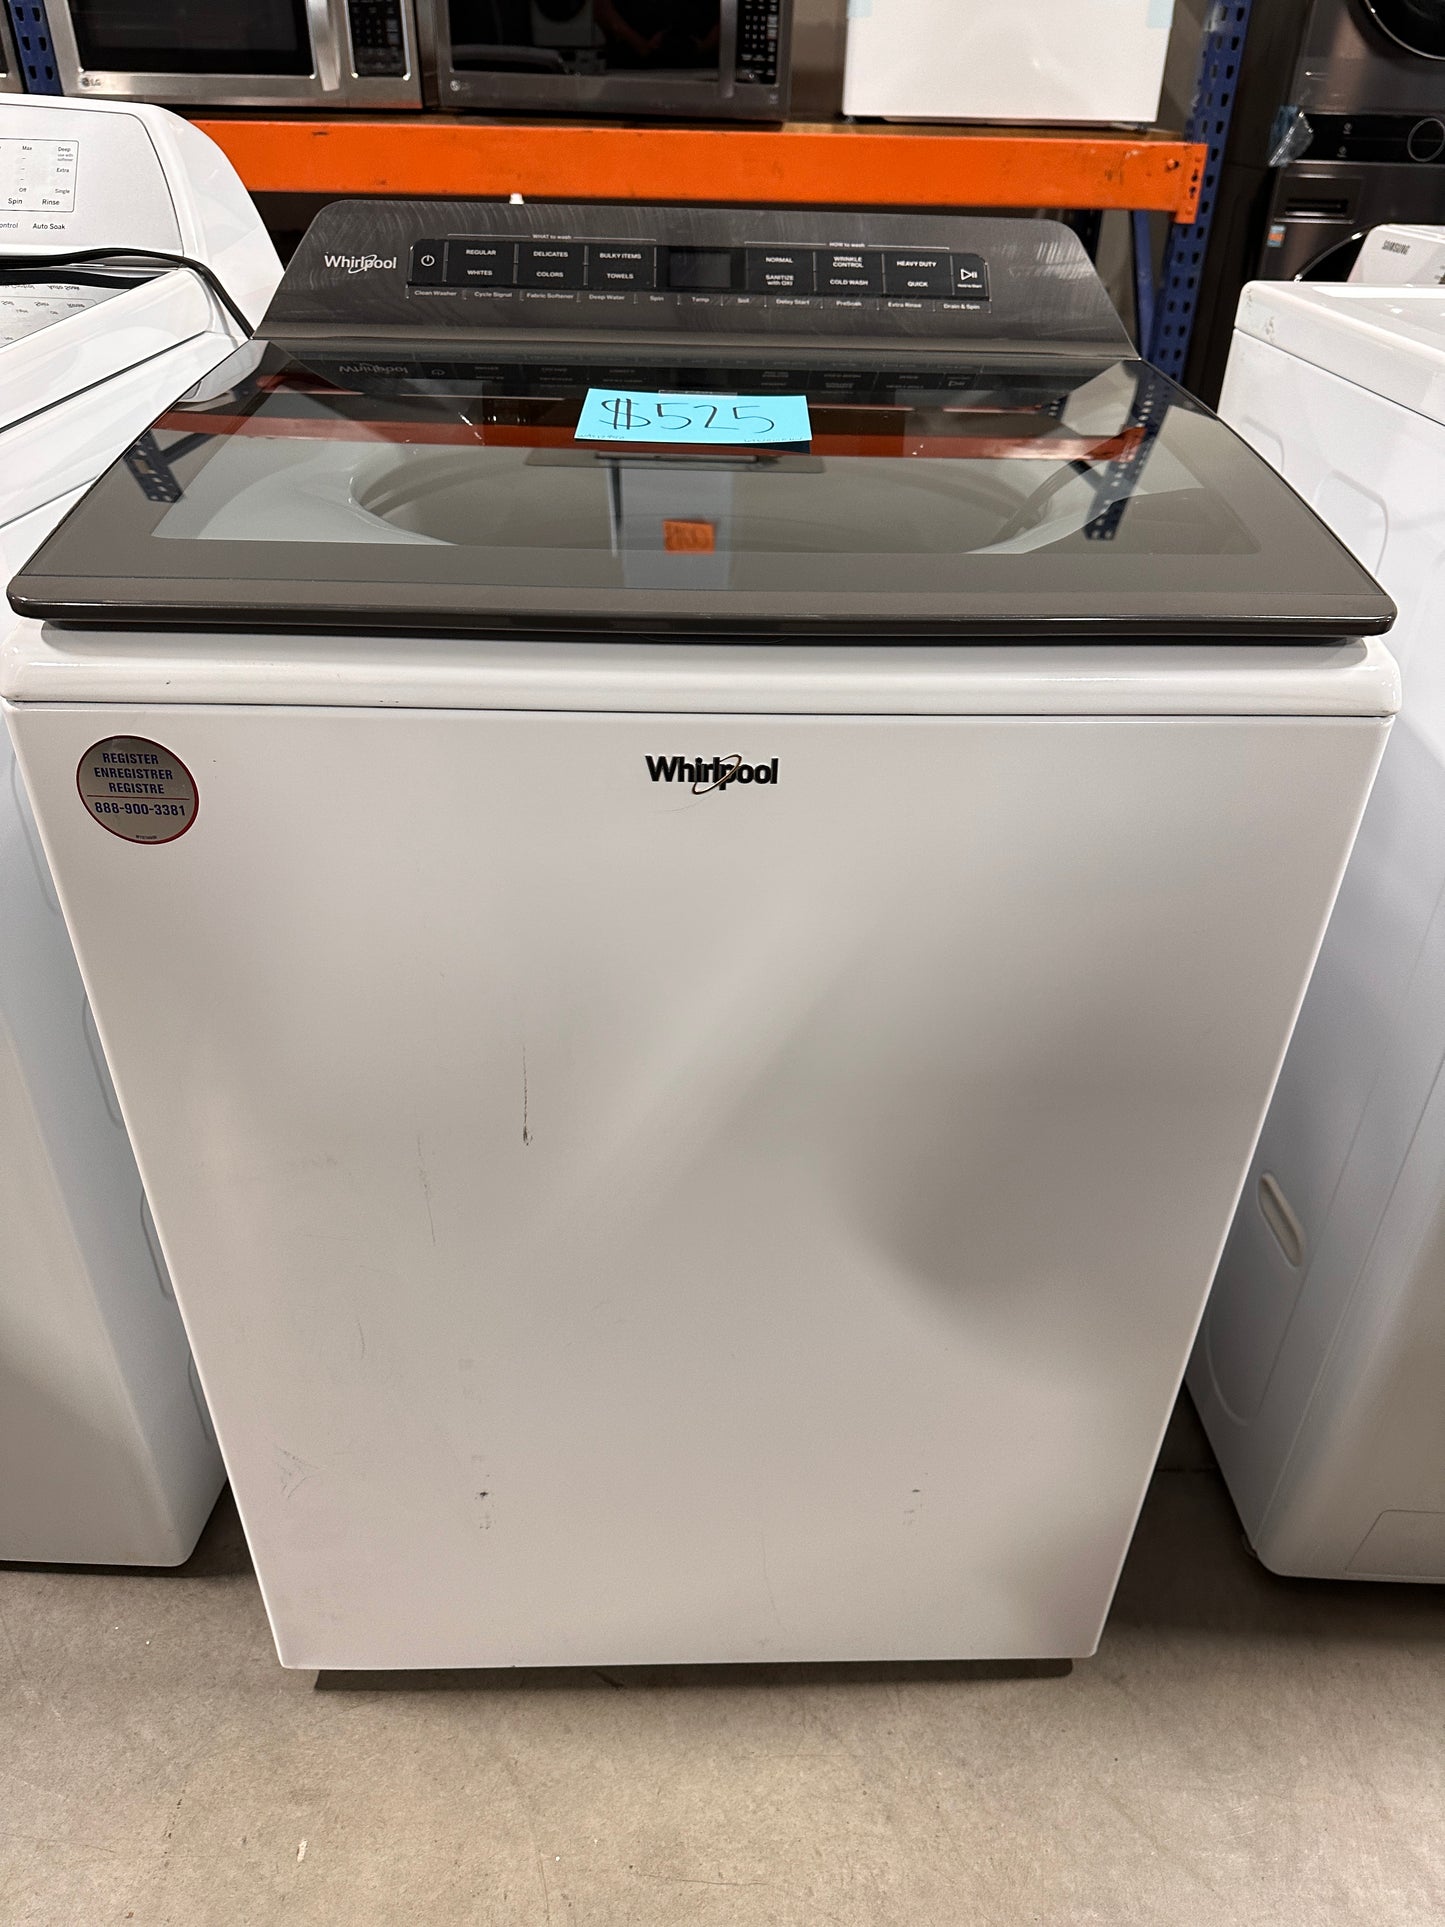 TOP LOAD WHIRLPOOL WASHER - WAS12950 WTW5105HW